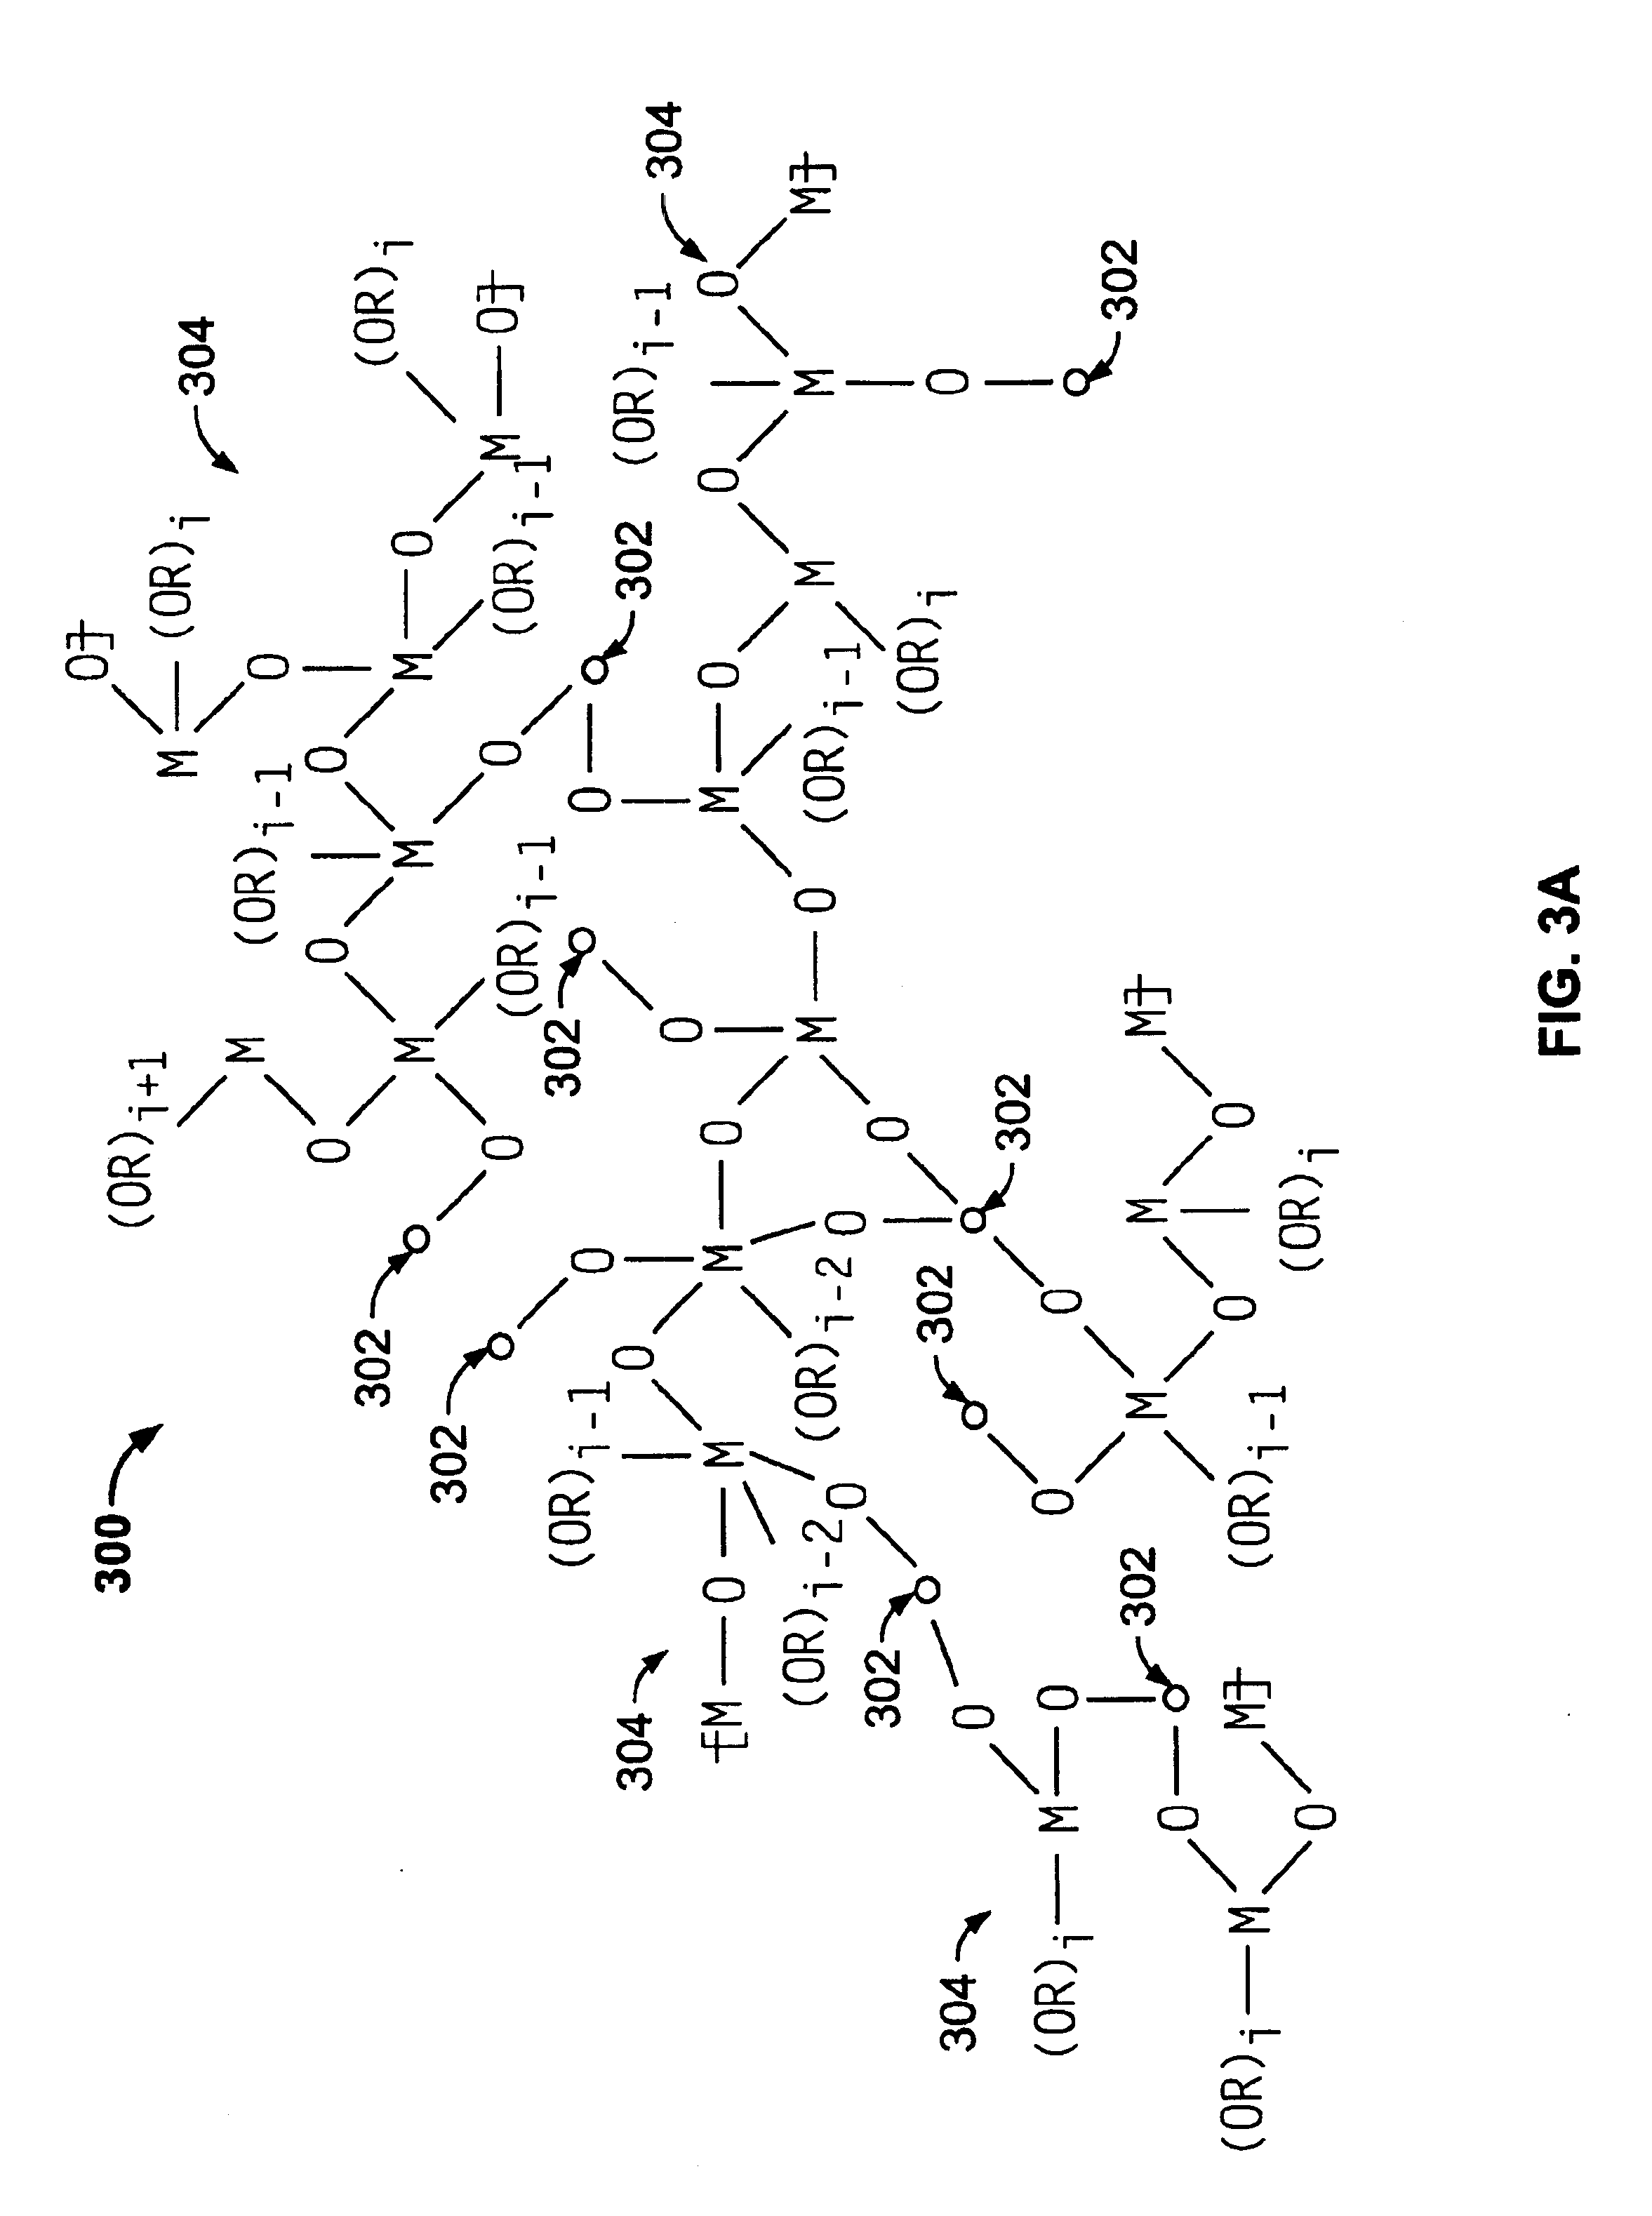 Wire interconnects for fabricating interconnected photovoltaic cells